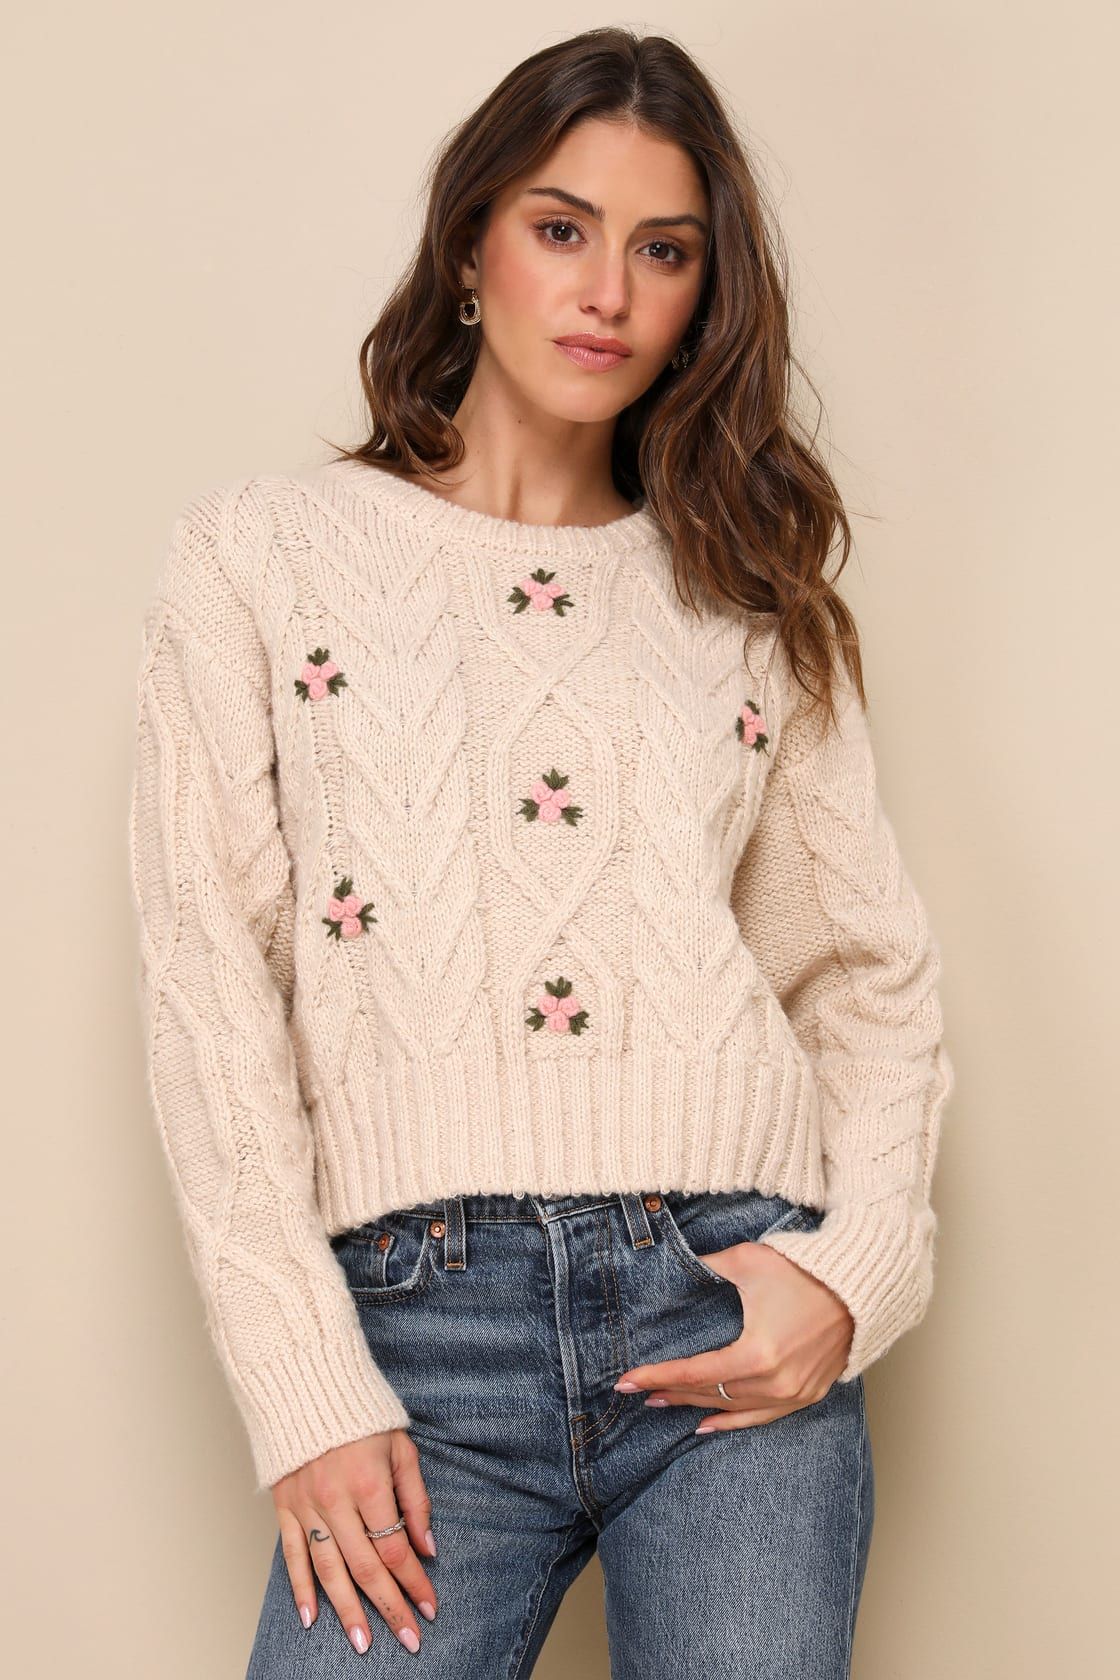 Cuddly Darling Beige Floral Cable Knit Pullover Sweater | Lulus